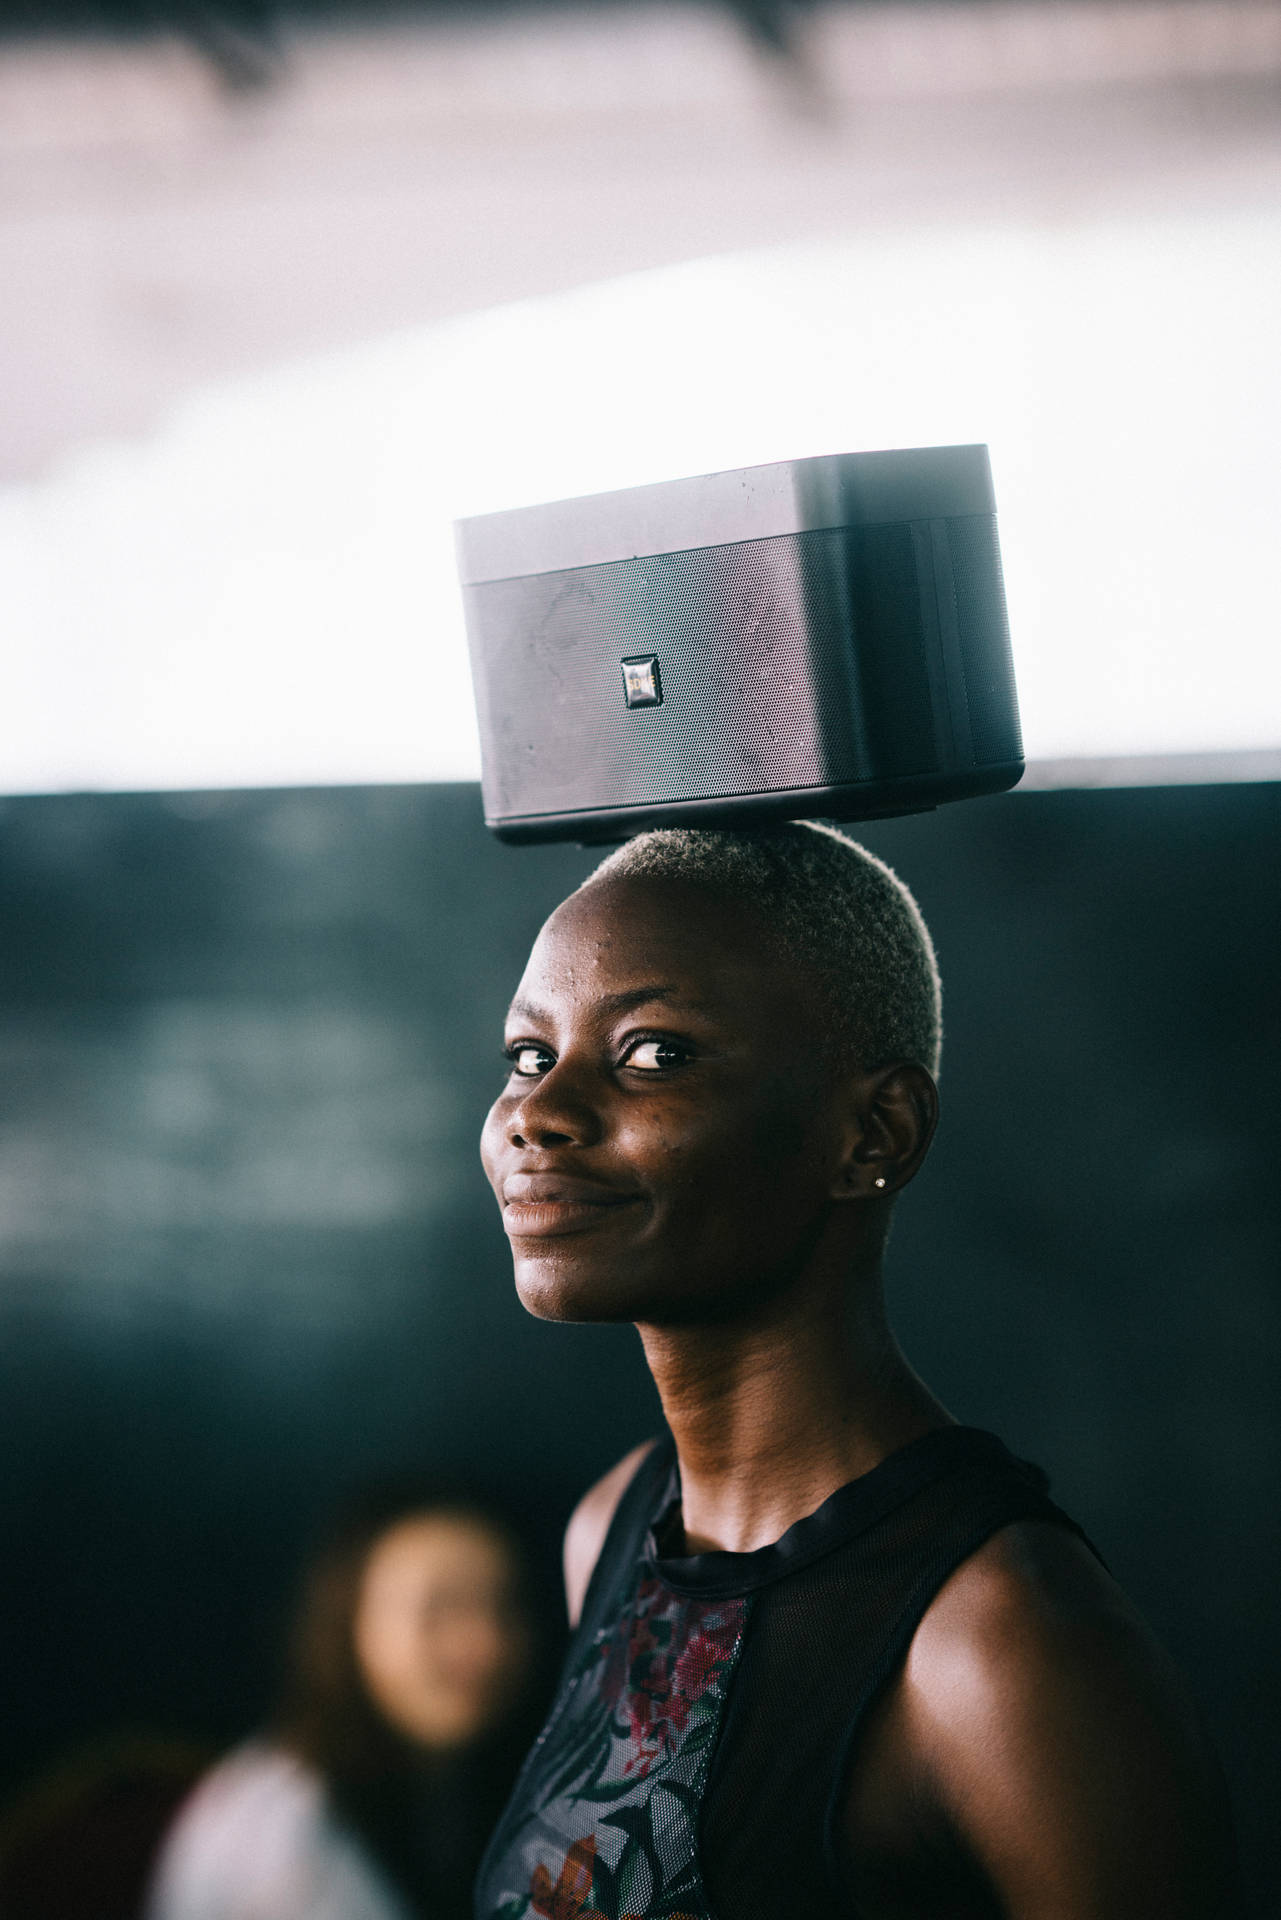 Woman With Stereo On Head In Sierra Leone